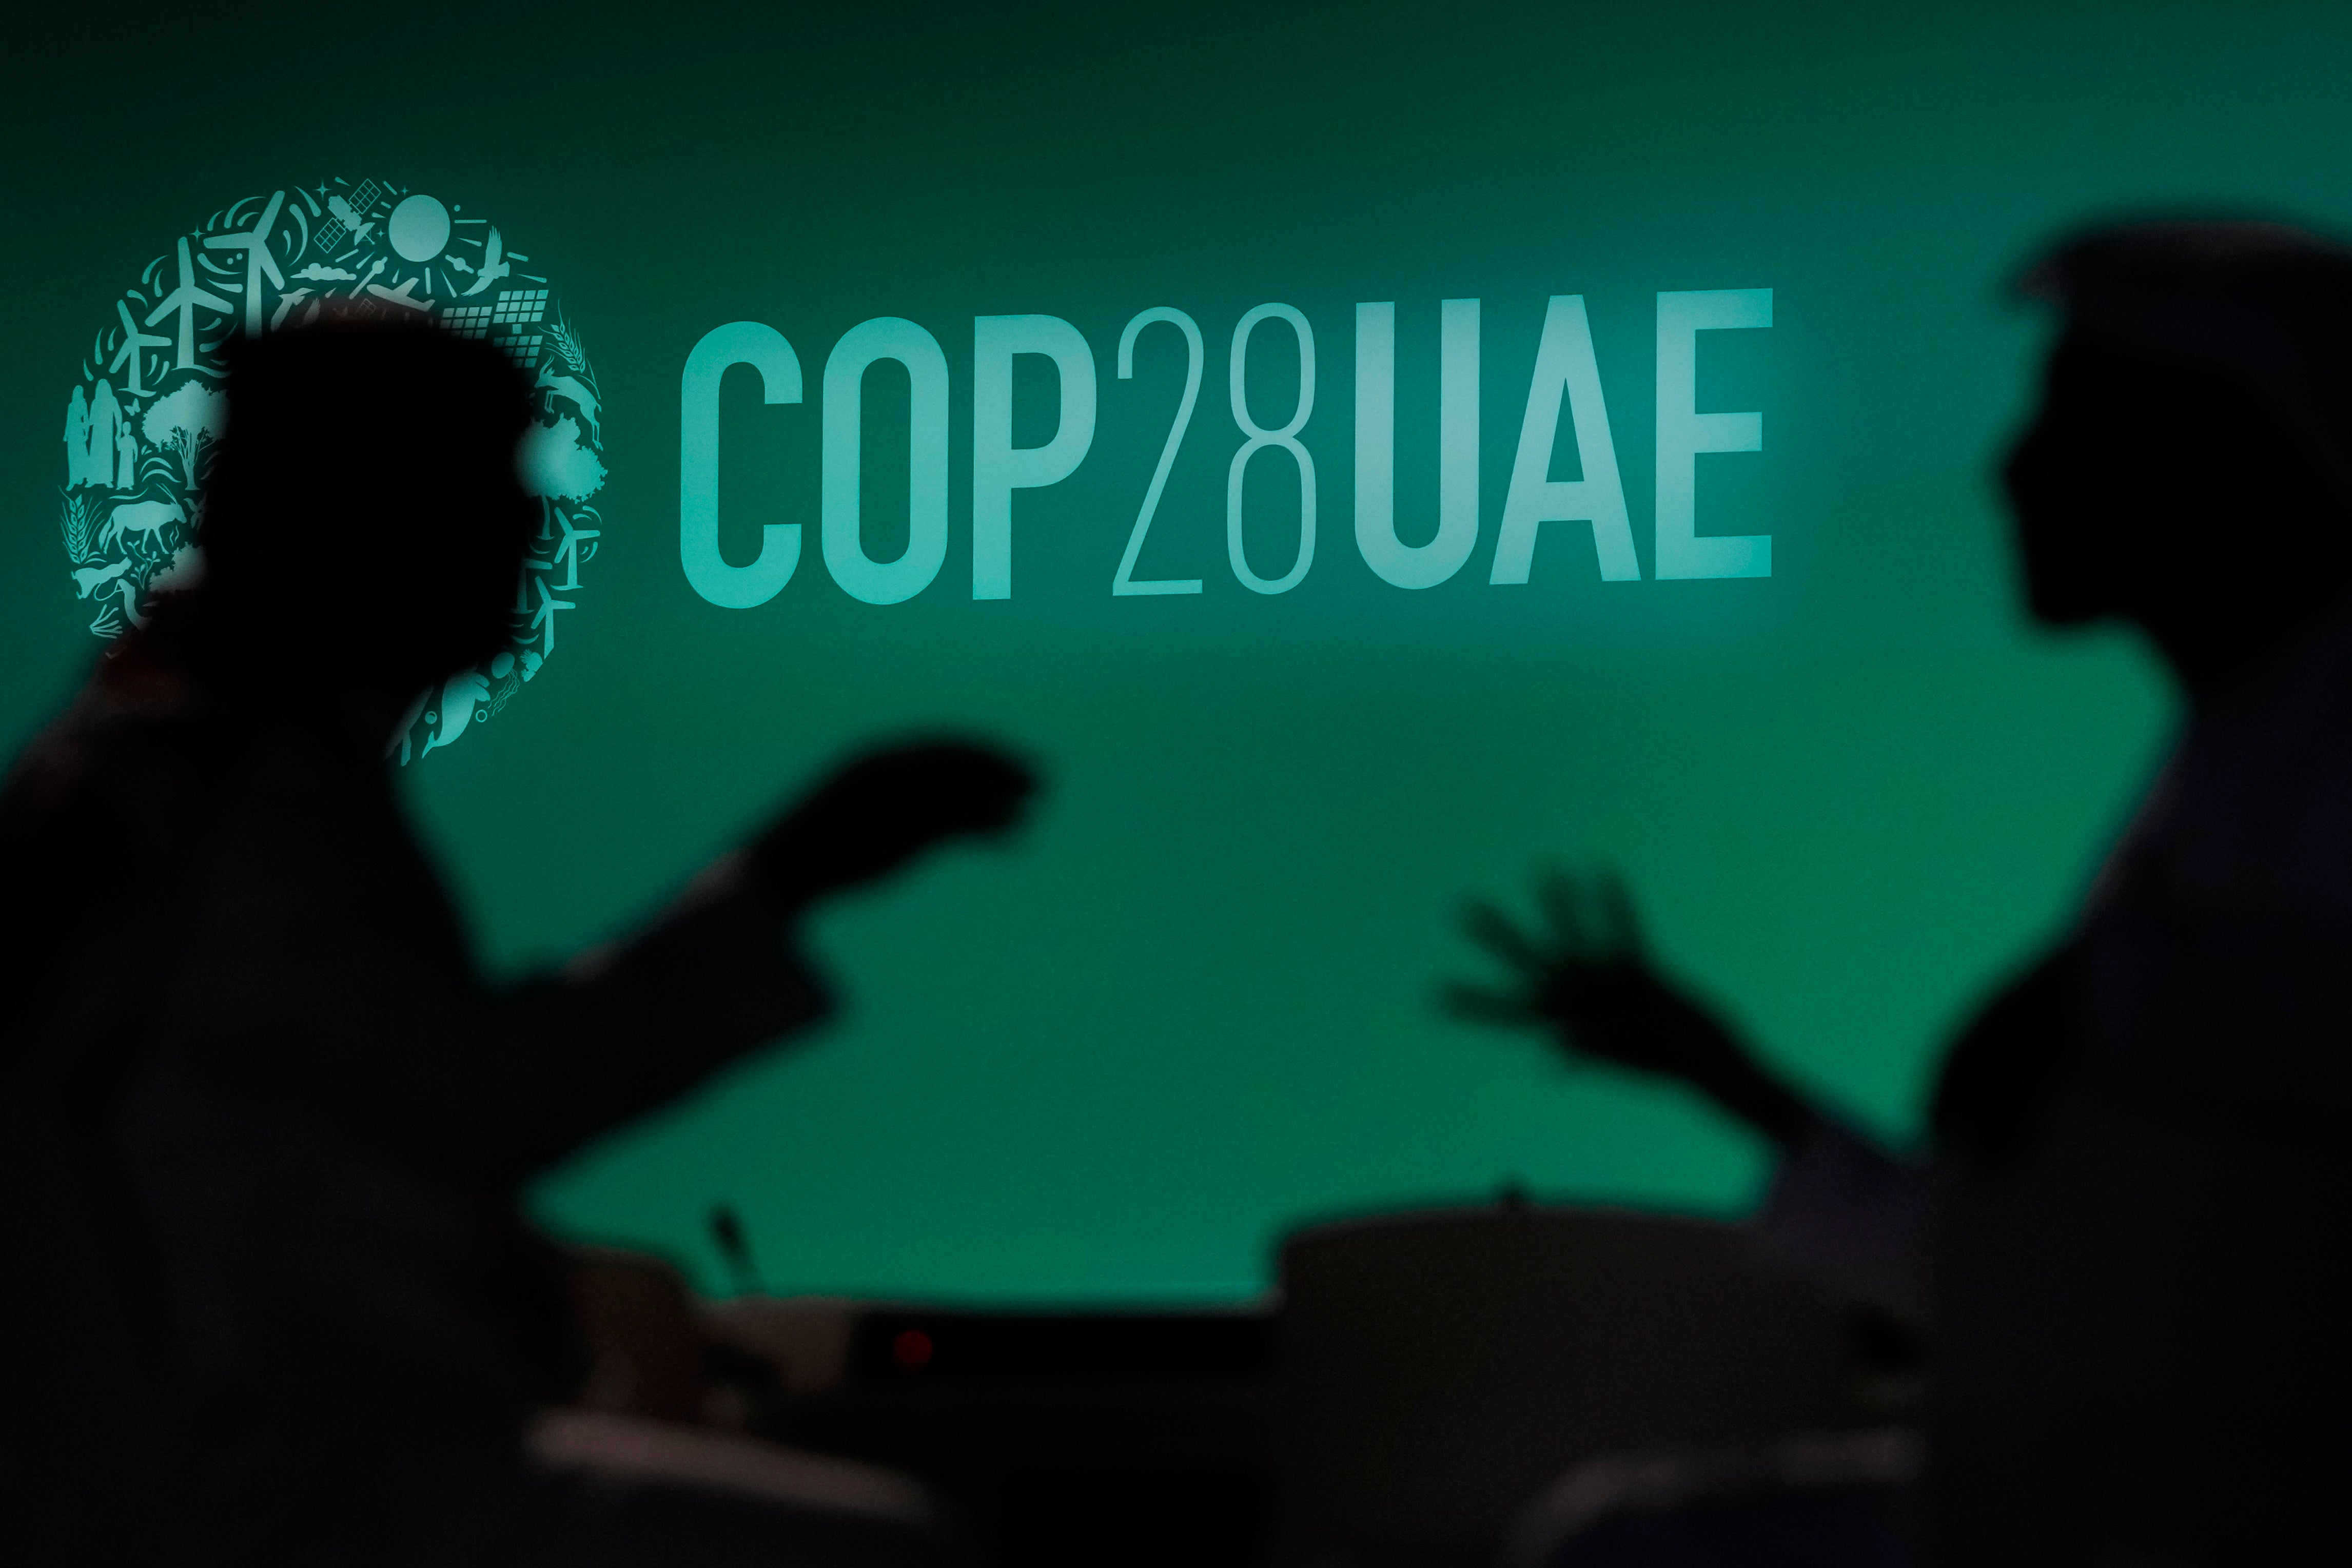 We’ll be brining you a daily update from Cop28